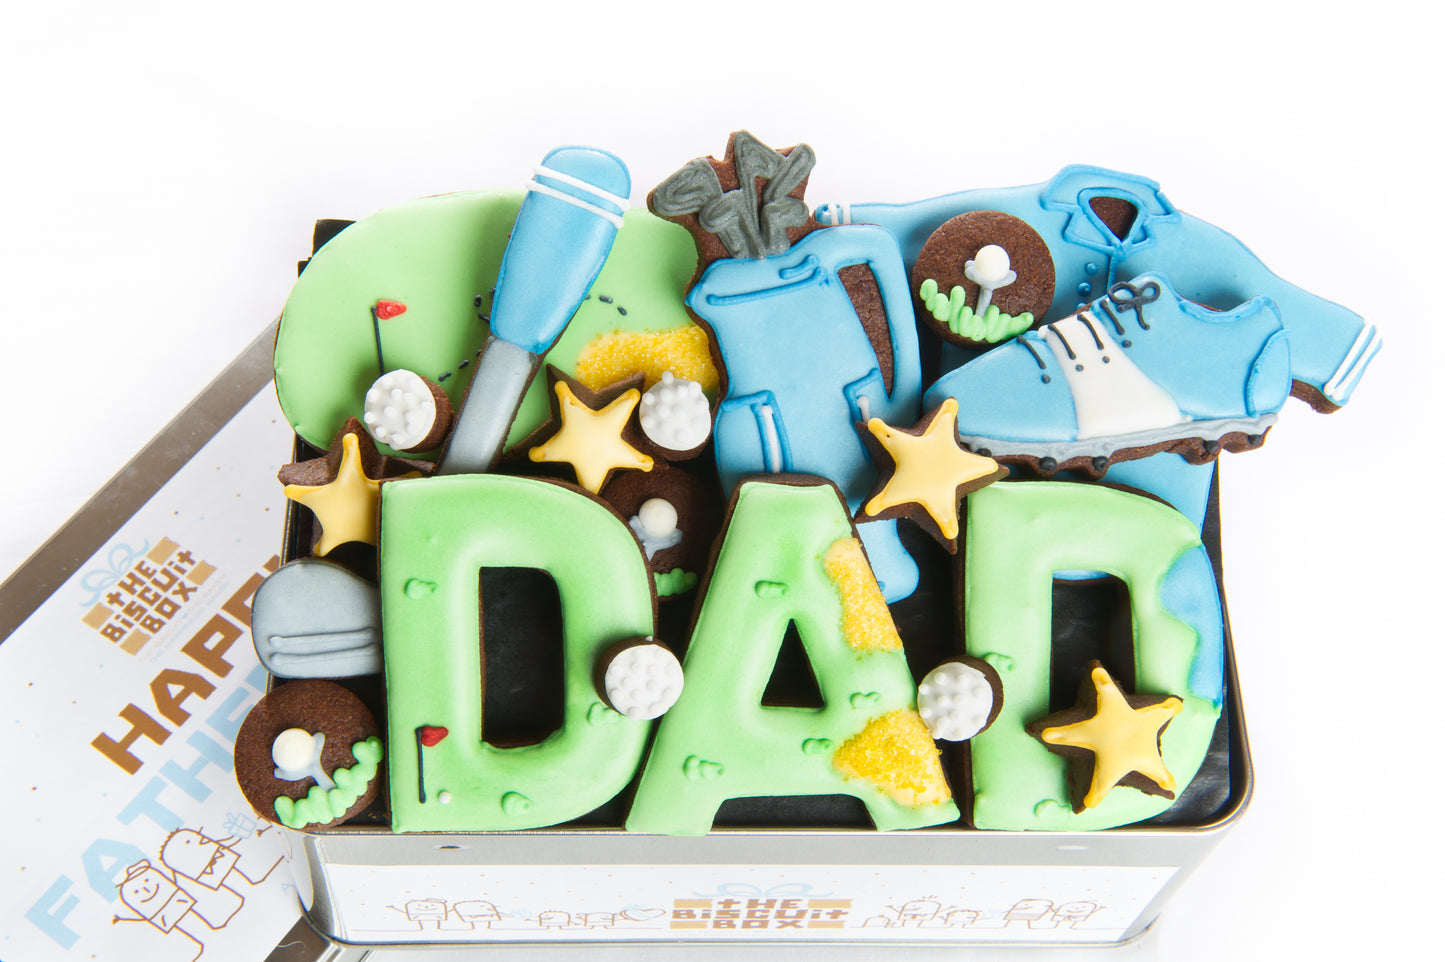 a Father's Day tin of biscuits with a golfing theme.  Dad iced biscuits. golf club, golf shirt and golf bag designs iced onto chocolate biscuits displayed in Father's day gift tin.